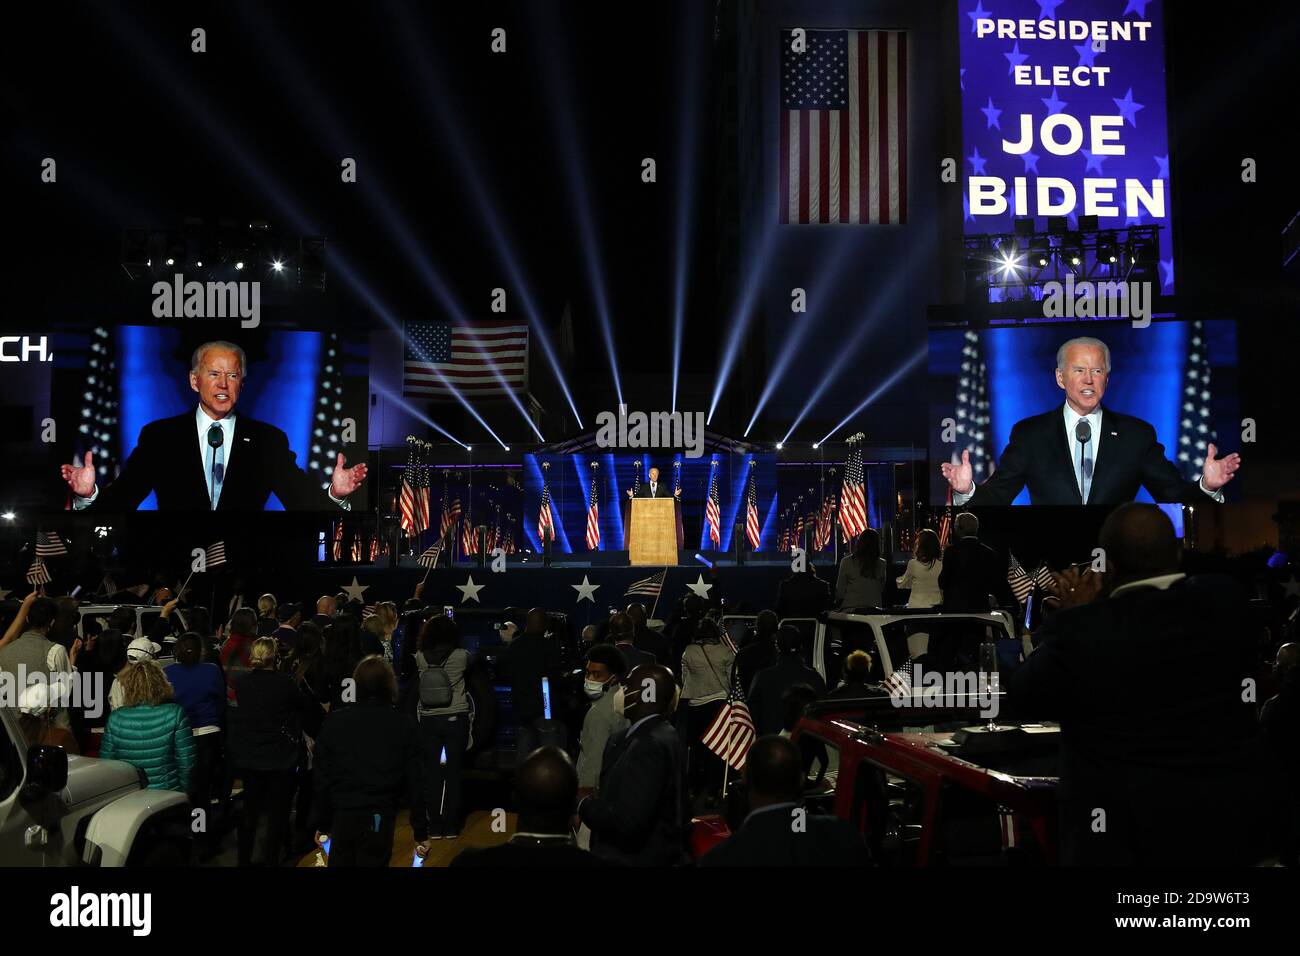 Wilmington, United States. 07th Nov, 2020. President-elect Joe Biden addresses the nation from the Chase Center on Saturday, November 7, 2020 in Wilmington, Delaware. After four days of counting the high volume of mail-in ballots in key battleground states due to the coronavirus pandemic, the race was called for Biden after a contentious election battle against incumbent Republican President Donald Trump. Pool photo by Tasos Katopodis/UPI Credit: UPI/Alamy Live News Stock Photo